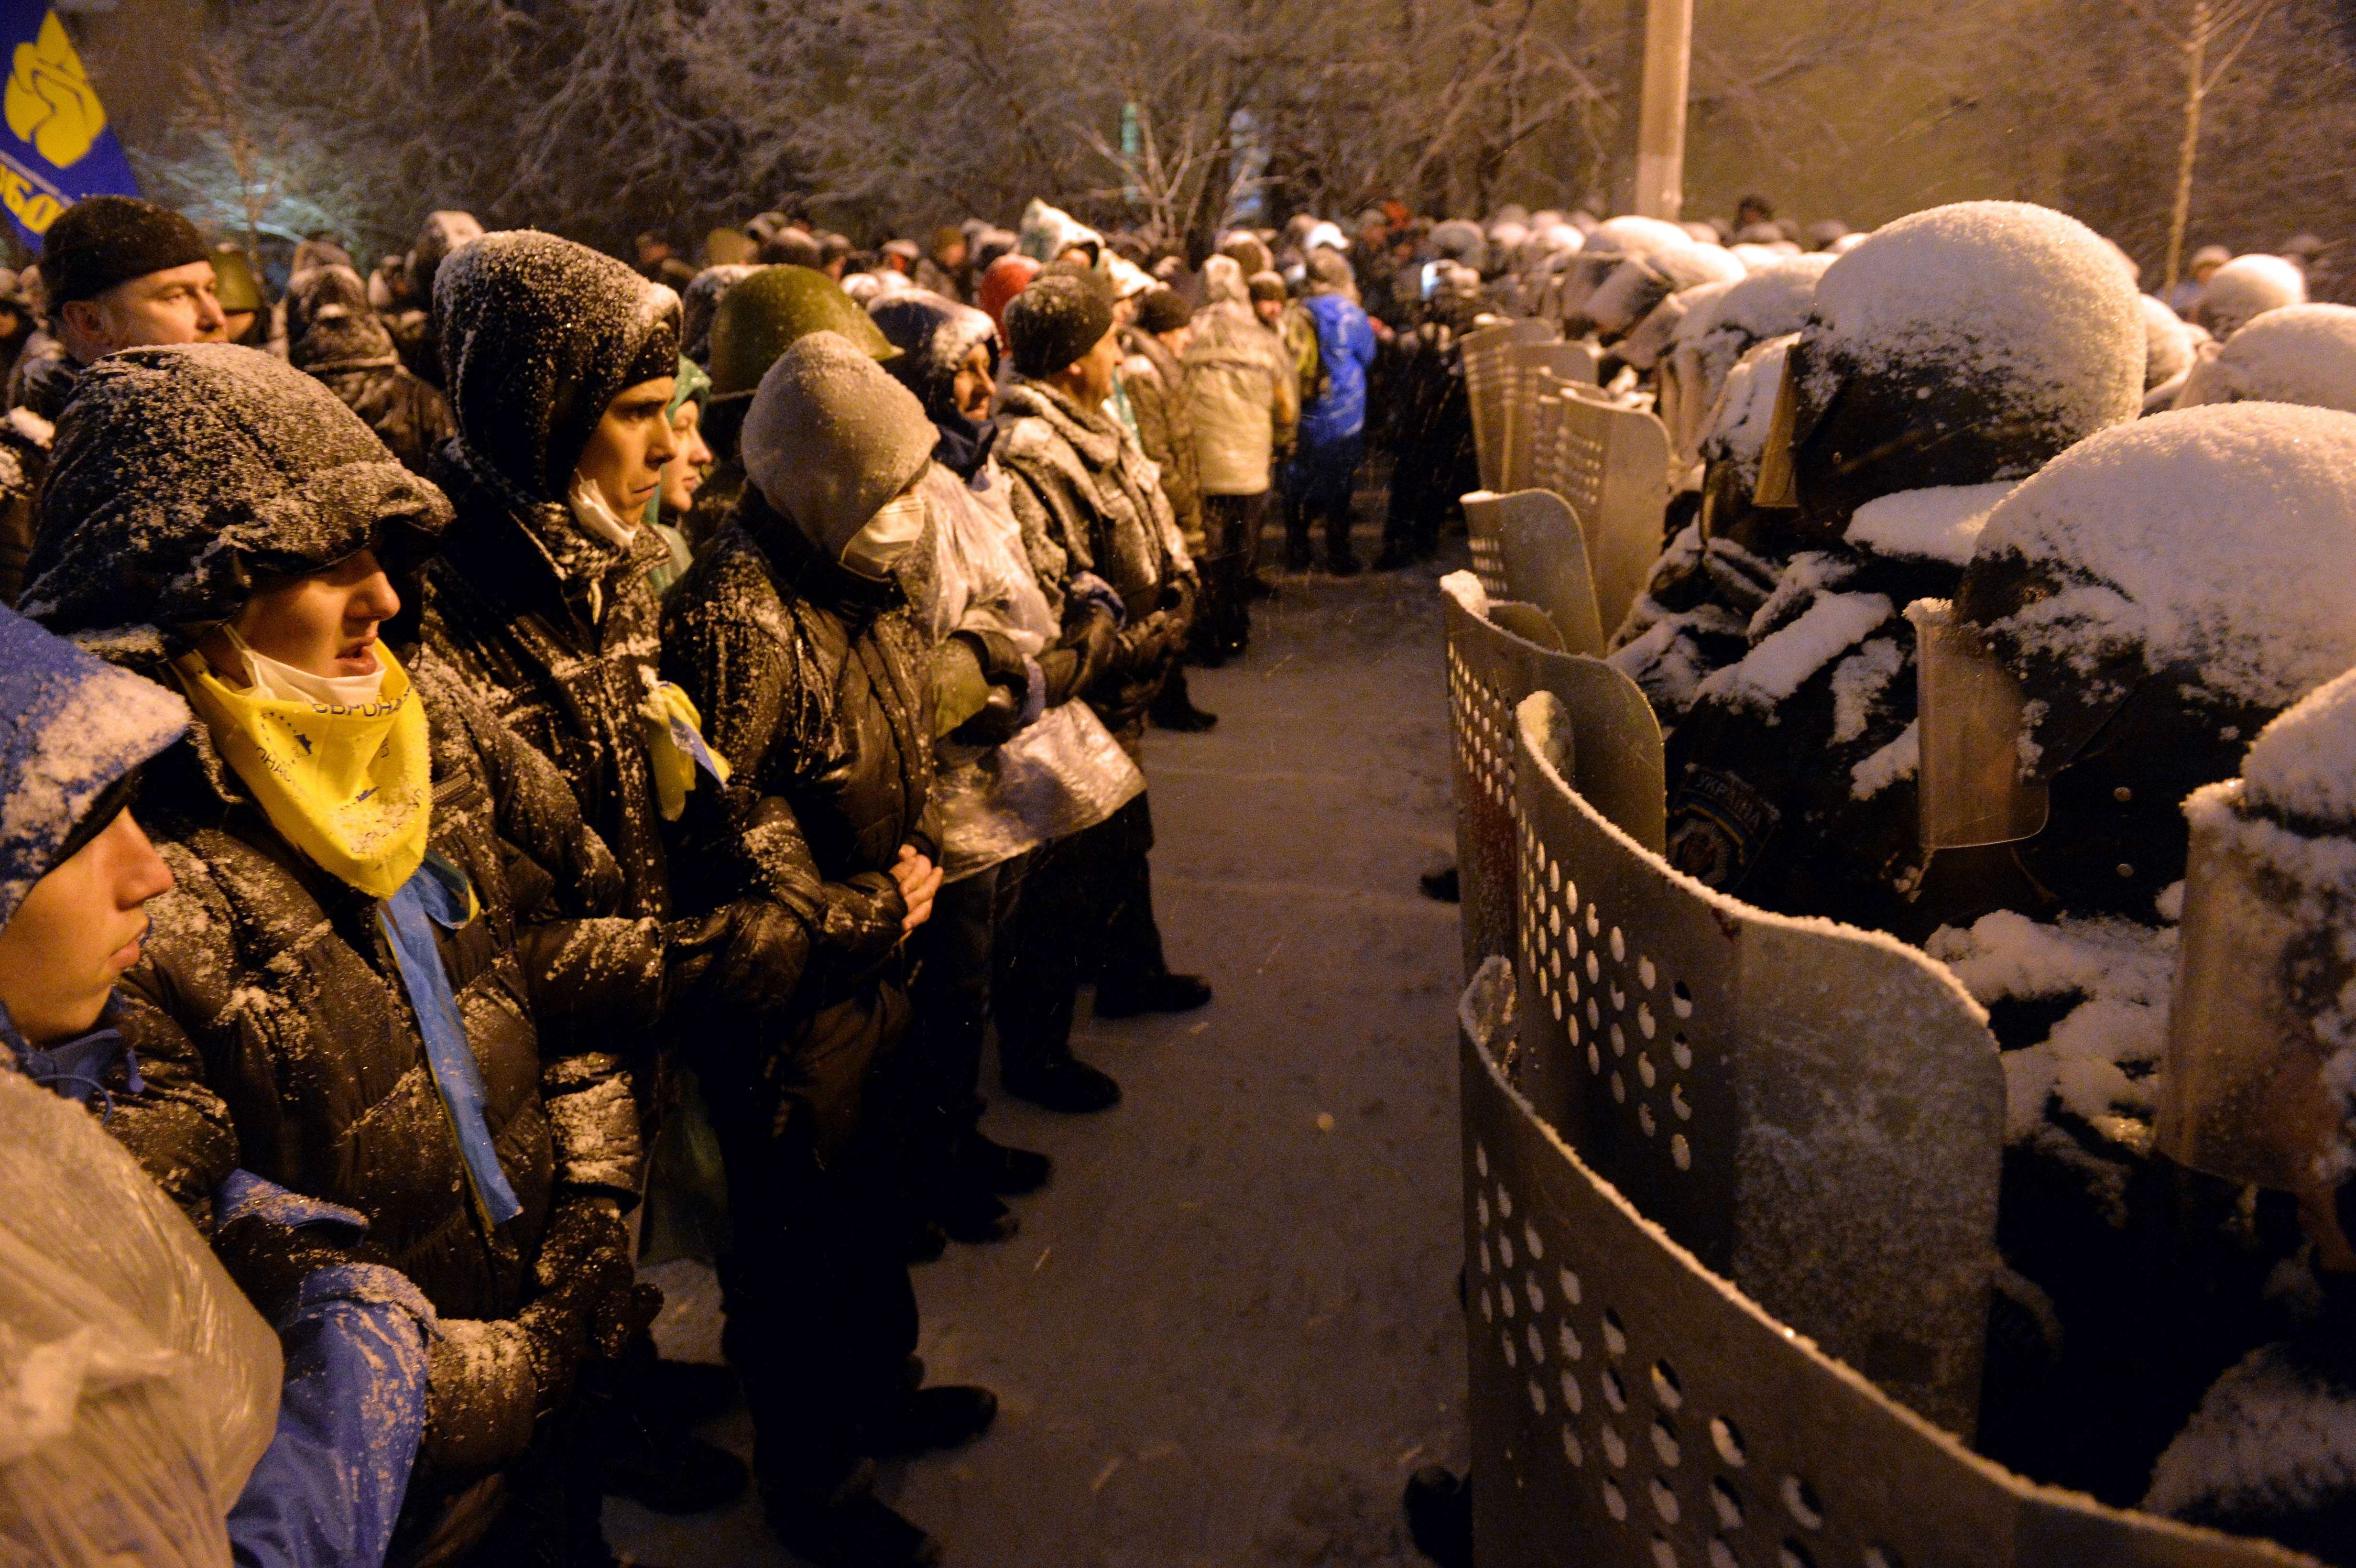 The protestors face-off the Special Units in Maidan Square